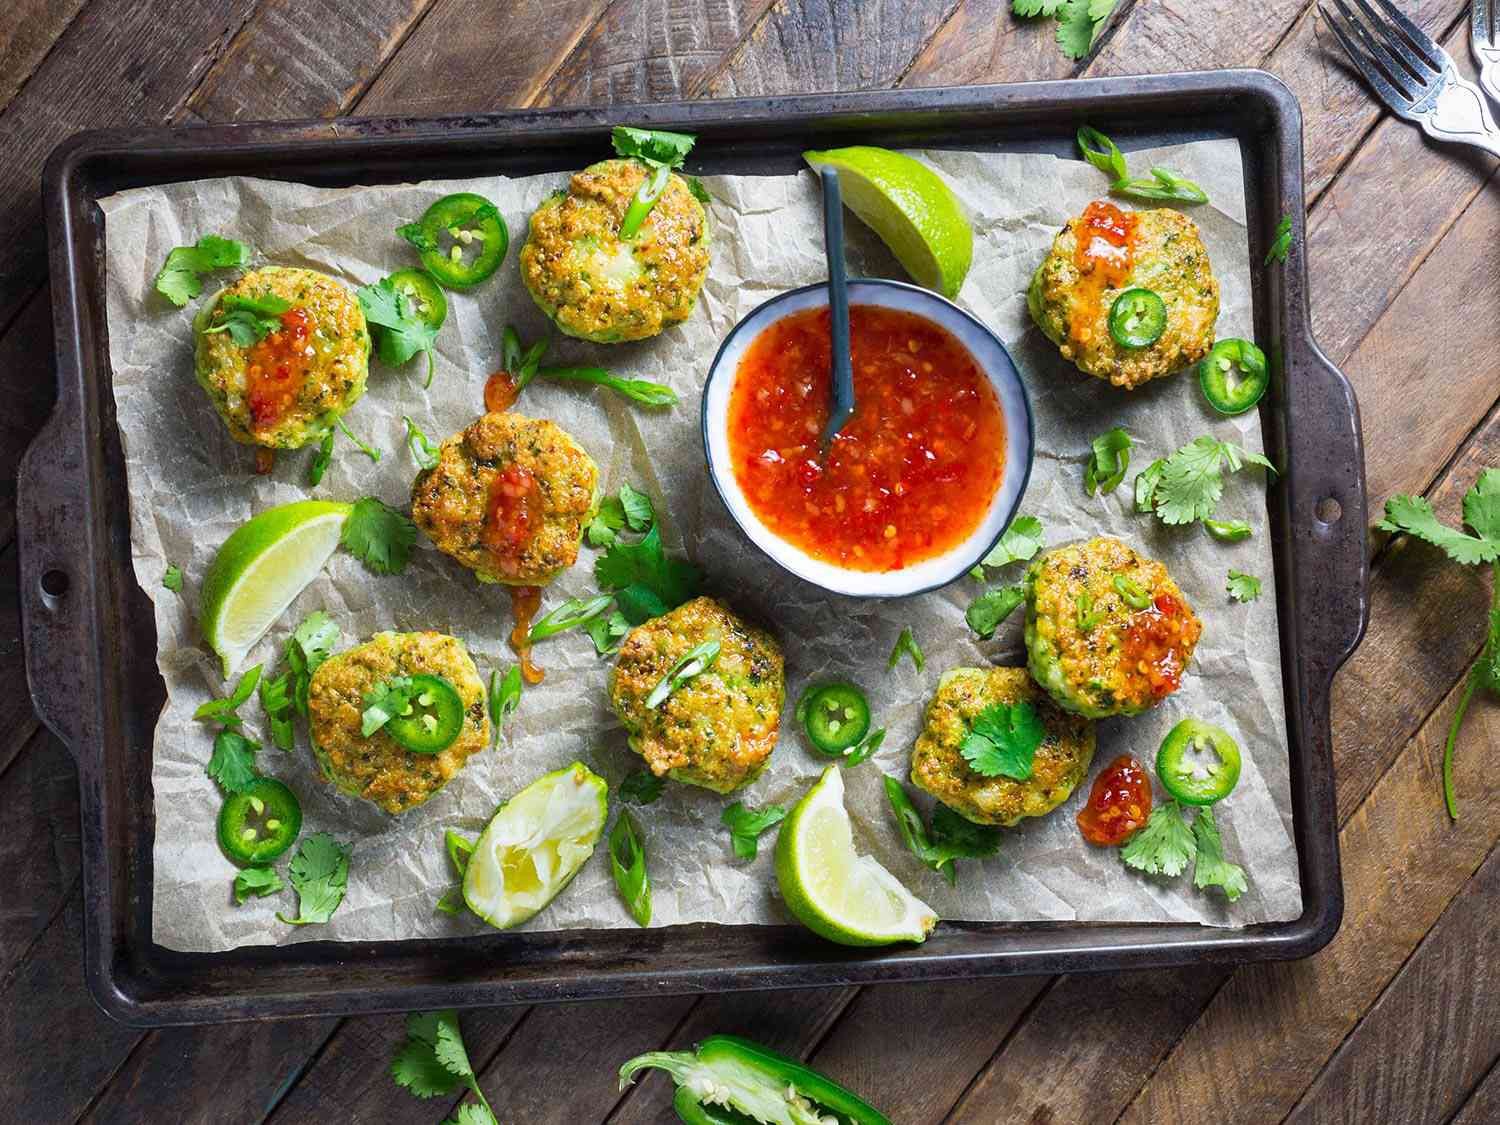 34 Super Bowl Snacks to Kick the Game Off Right